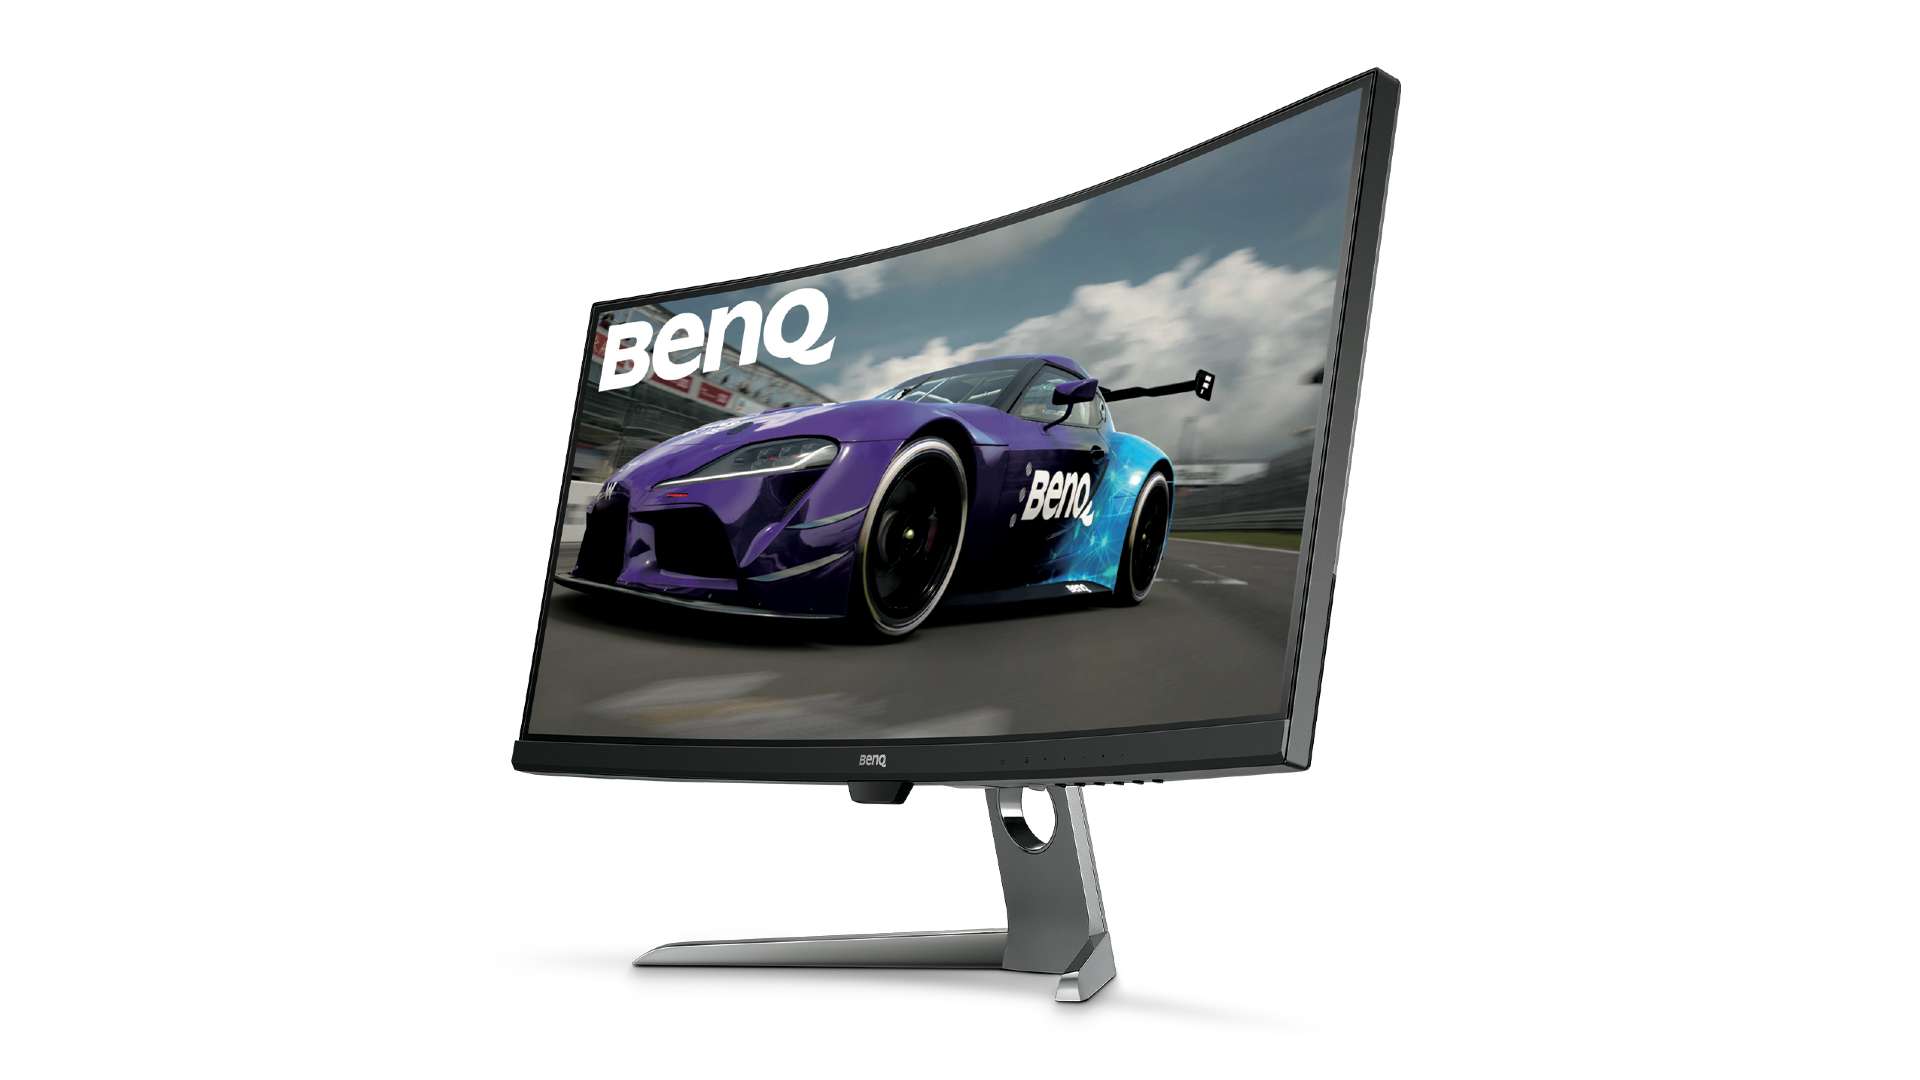 The BenQ EX3501R gaming monitor is positioned facing left against a white background.